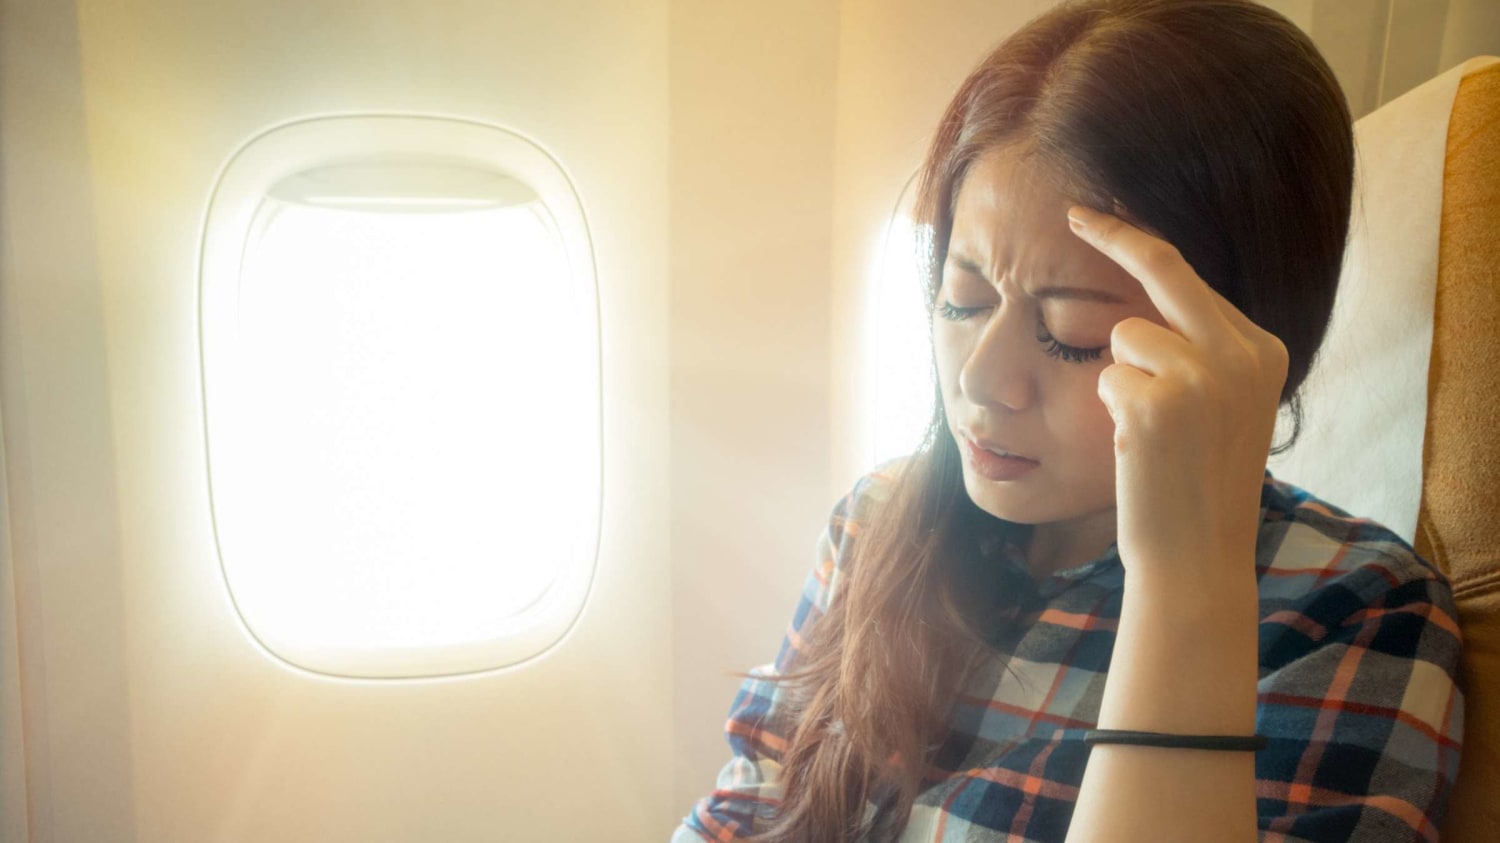 The Reason Why Airplanes Make You Gassy and How to Prevent It